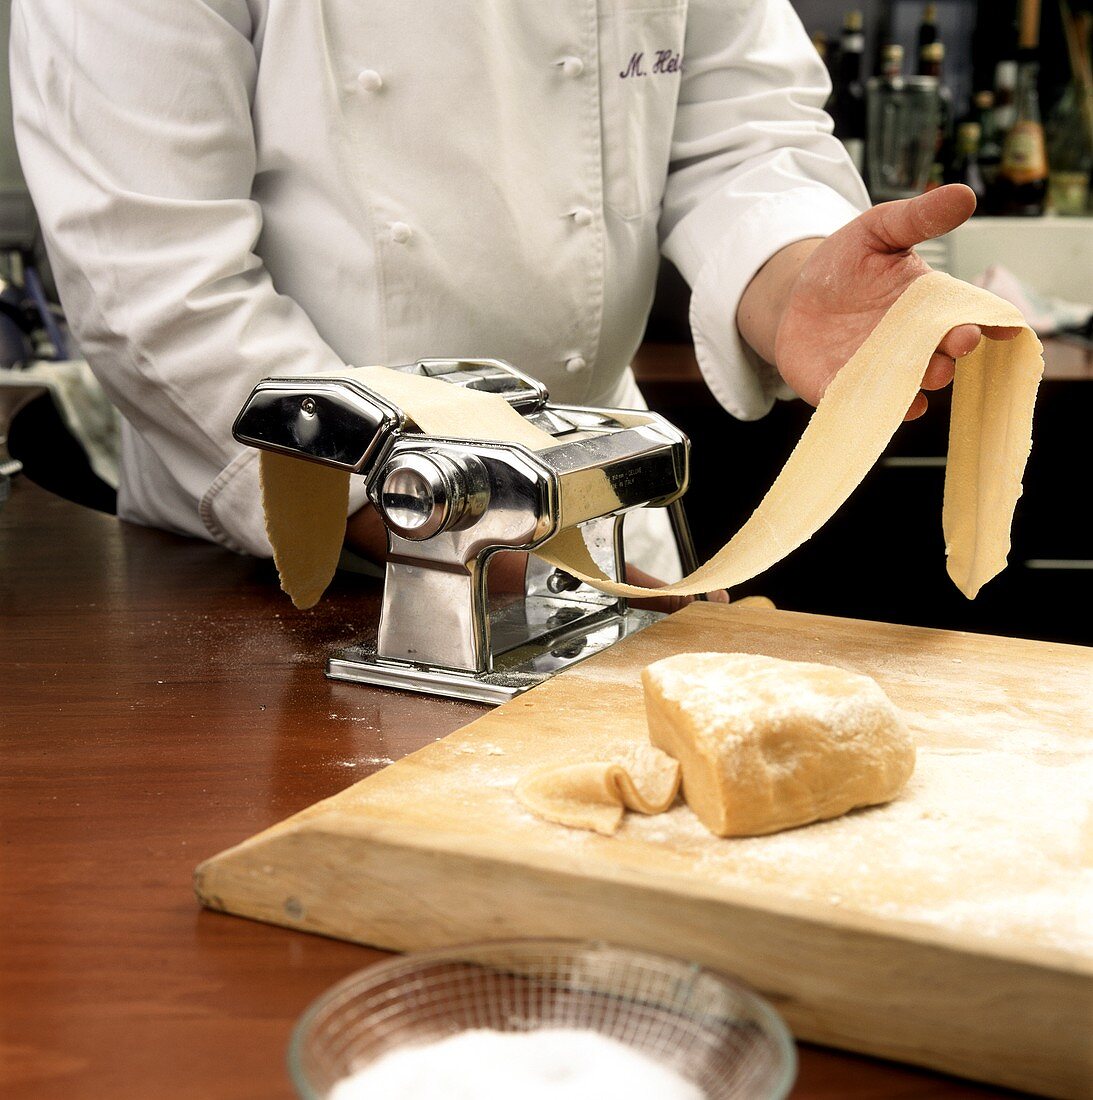 Working pasta dough with a machine